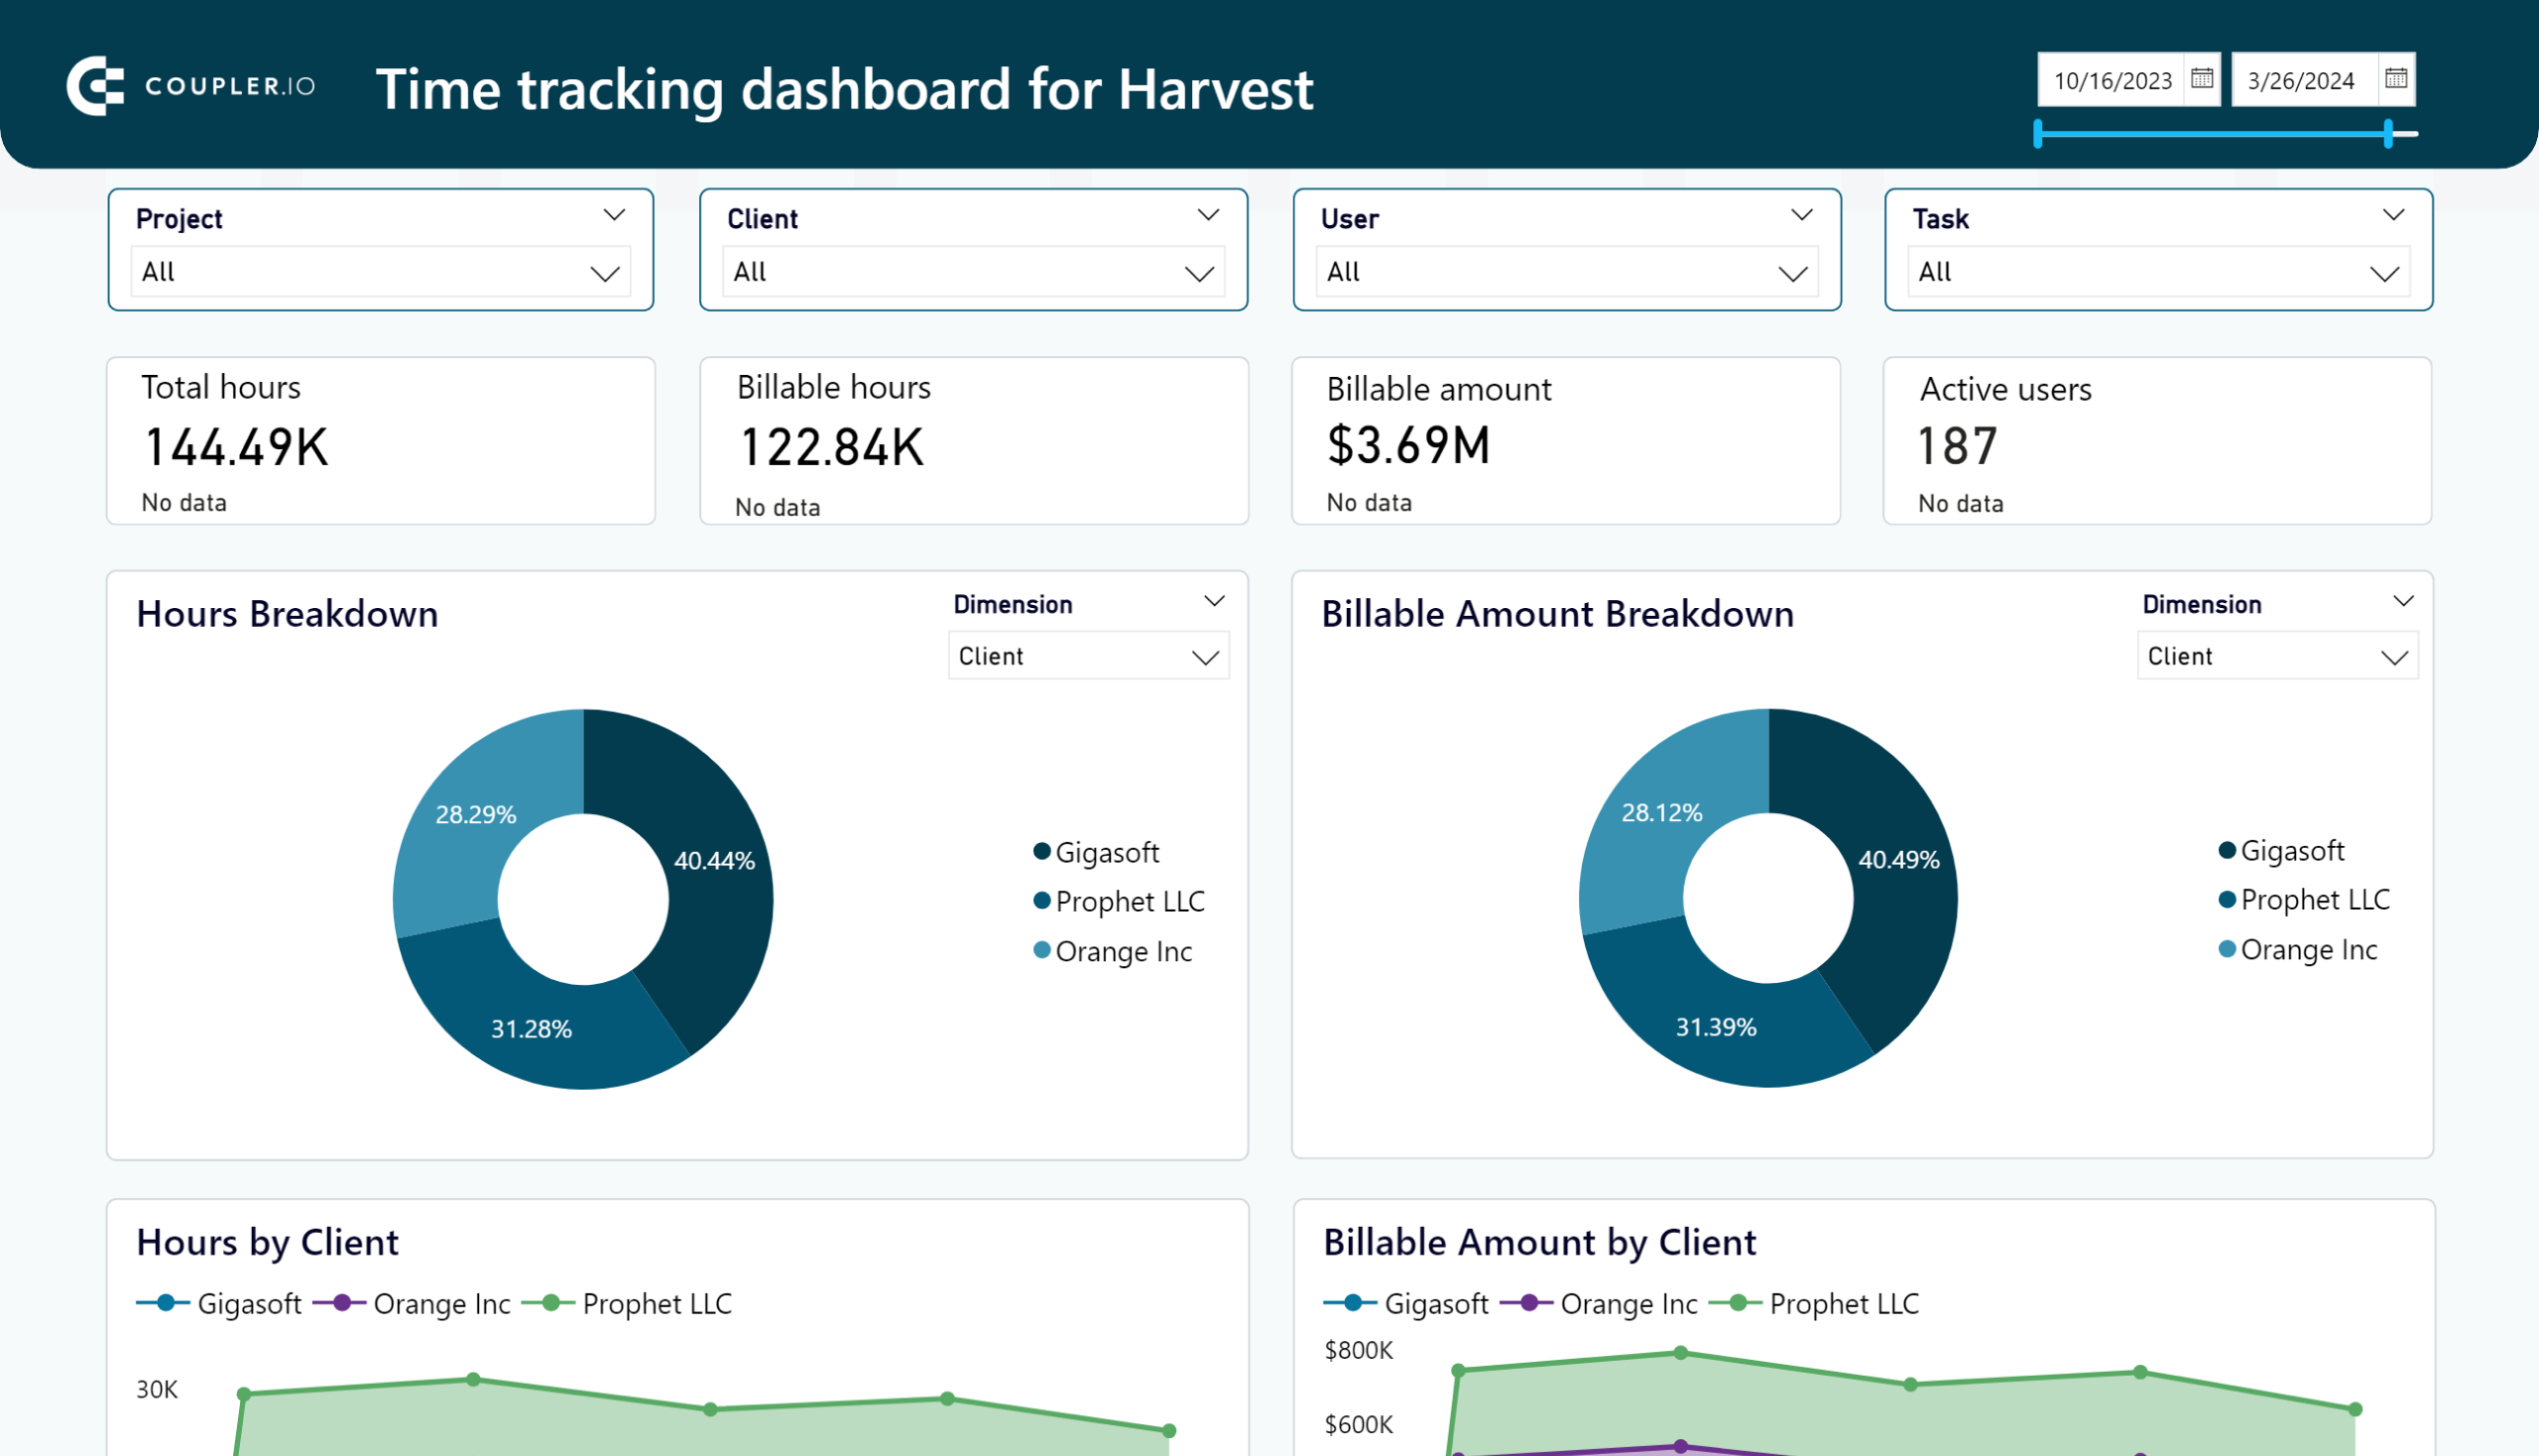 Time tracking dashboard for Harvest in Power BI image